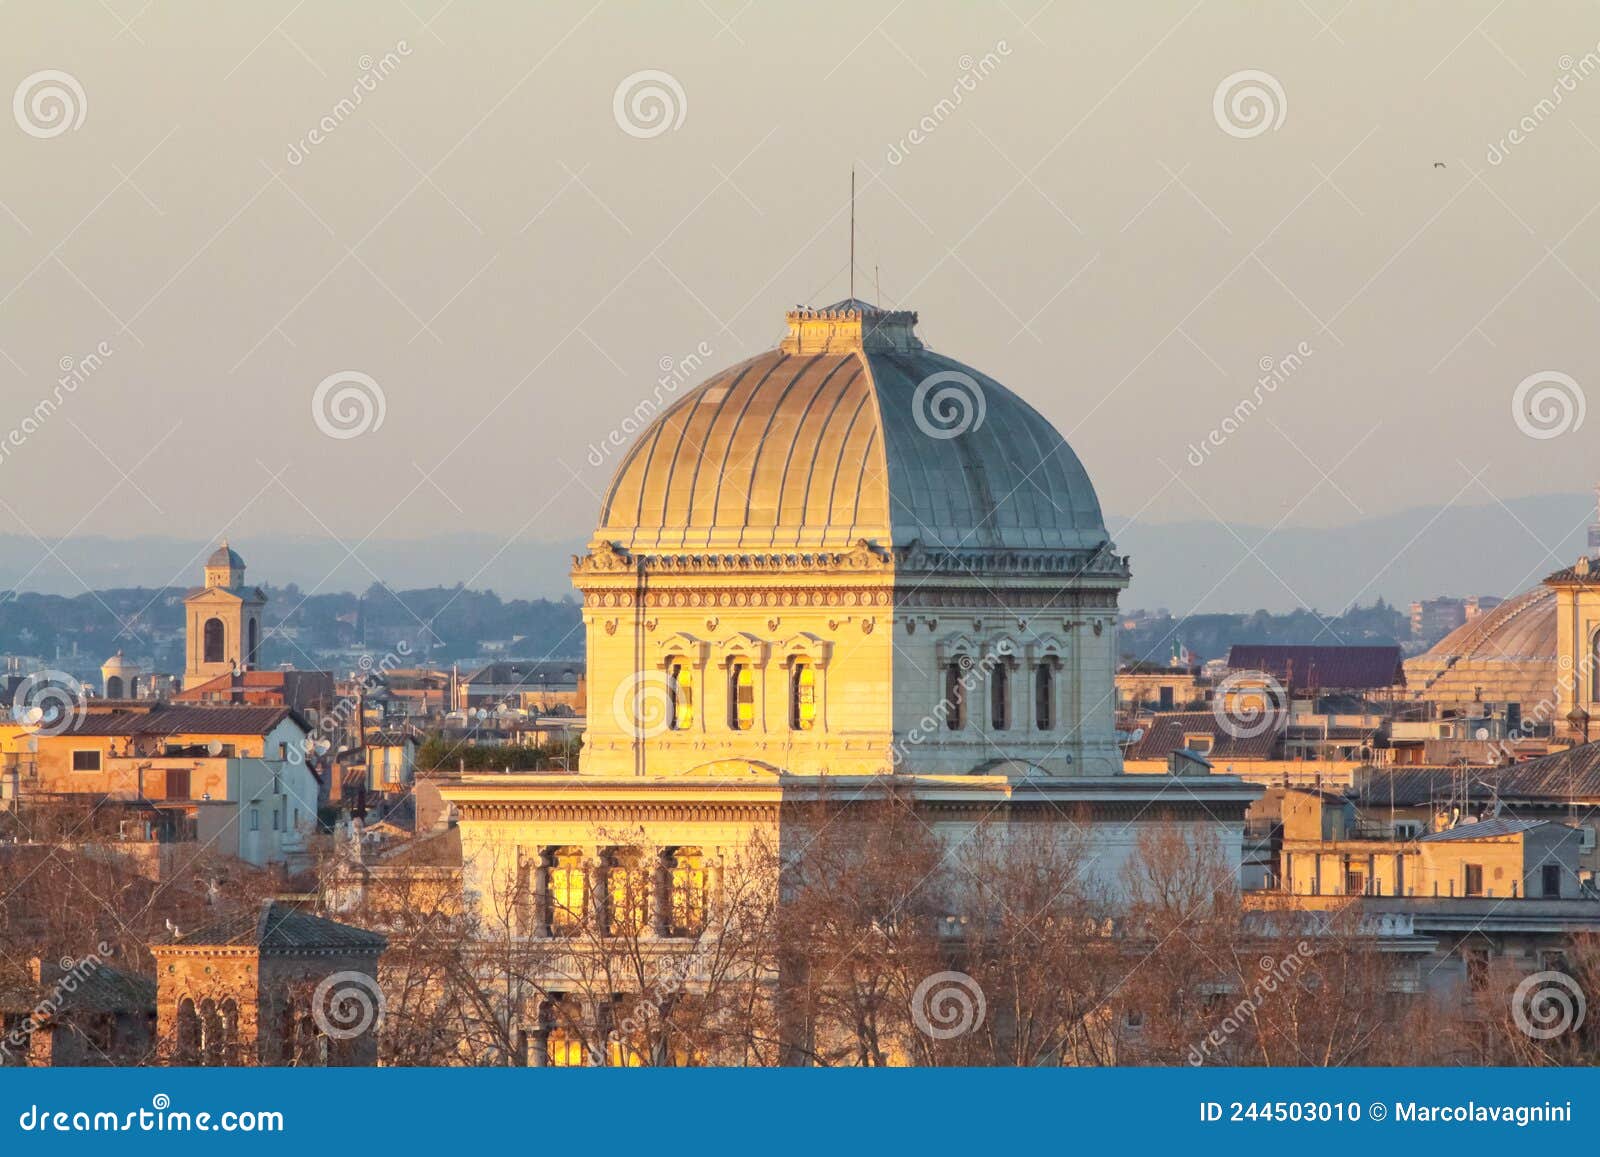 view of rome roofs: towerbell of saint augustine church, jewish synagogue and part of pantheon roof